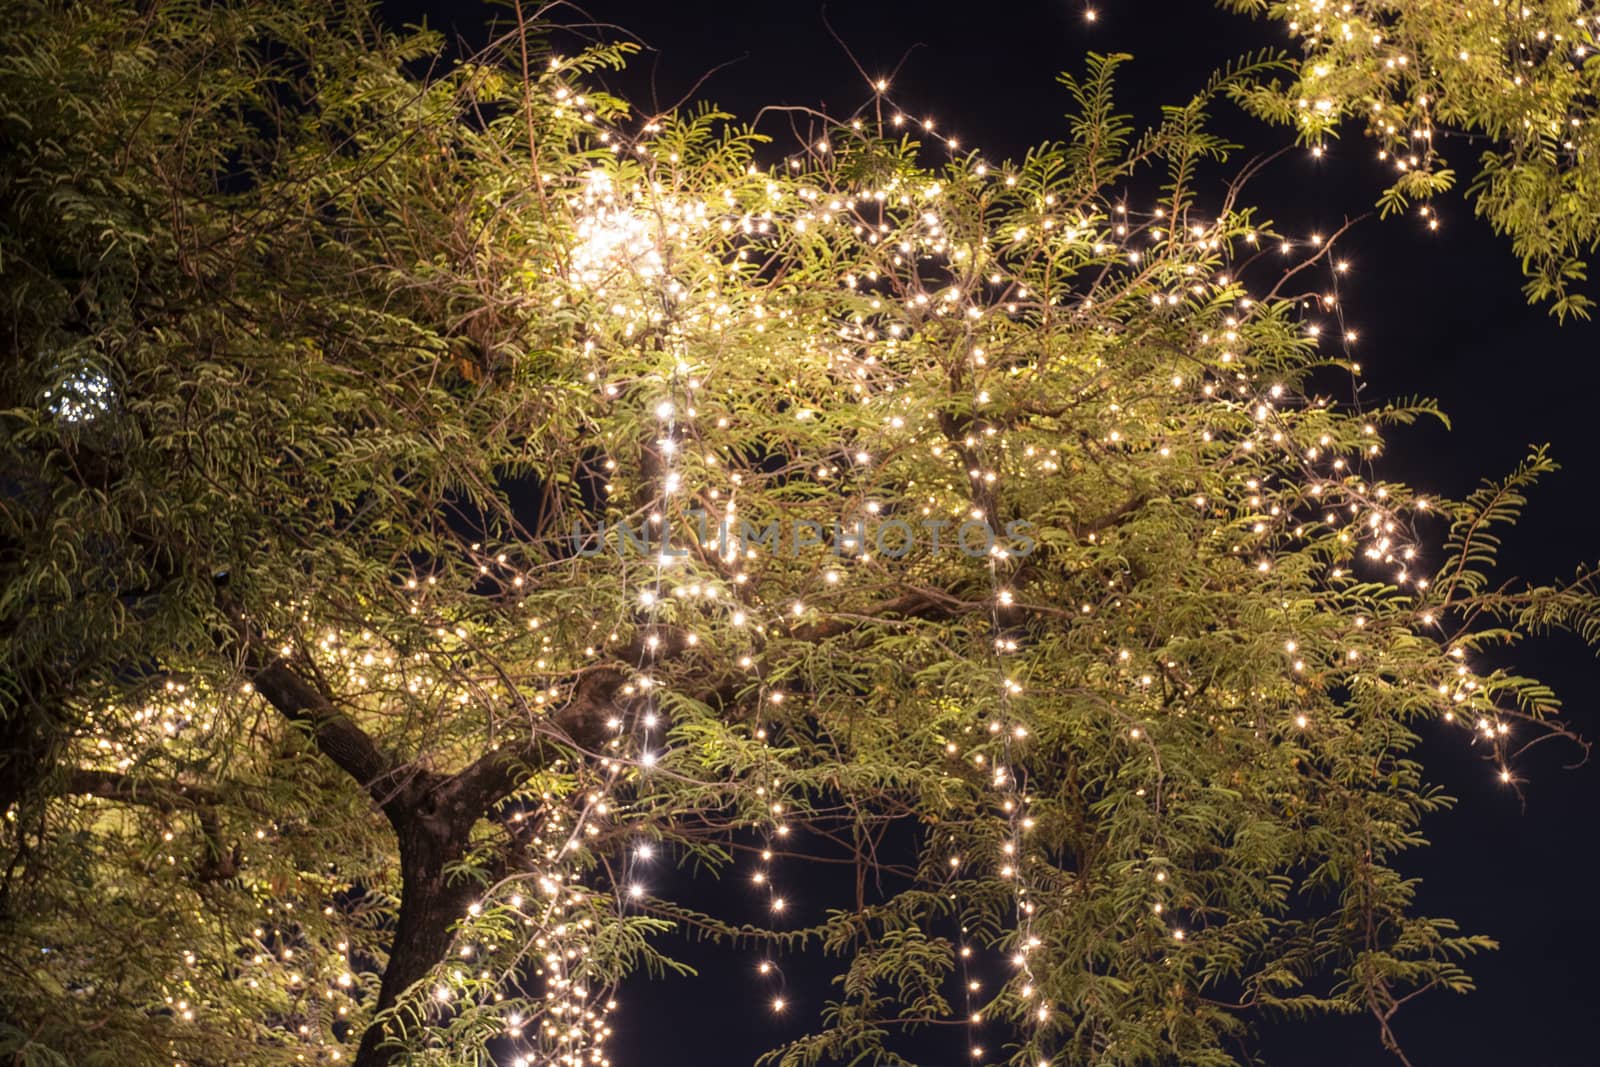 Decorative outdoor string lights hanging on tree in the garden at night time 